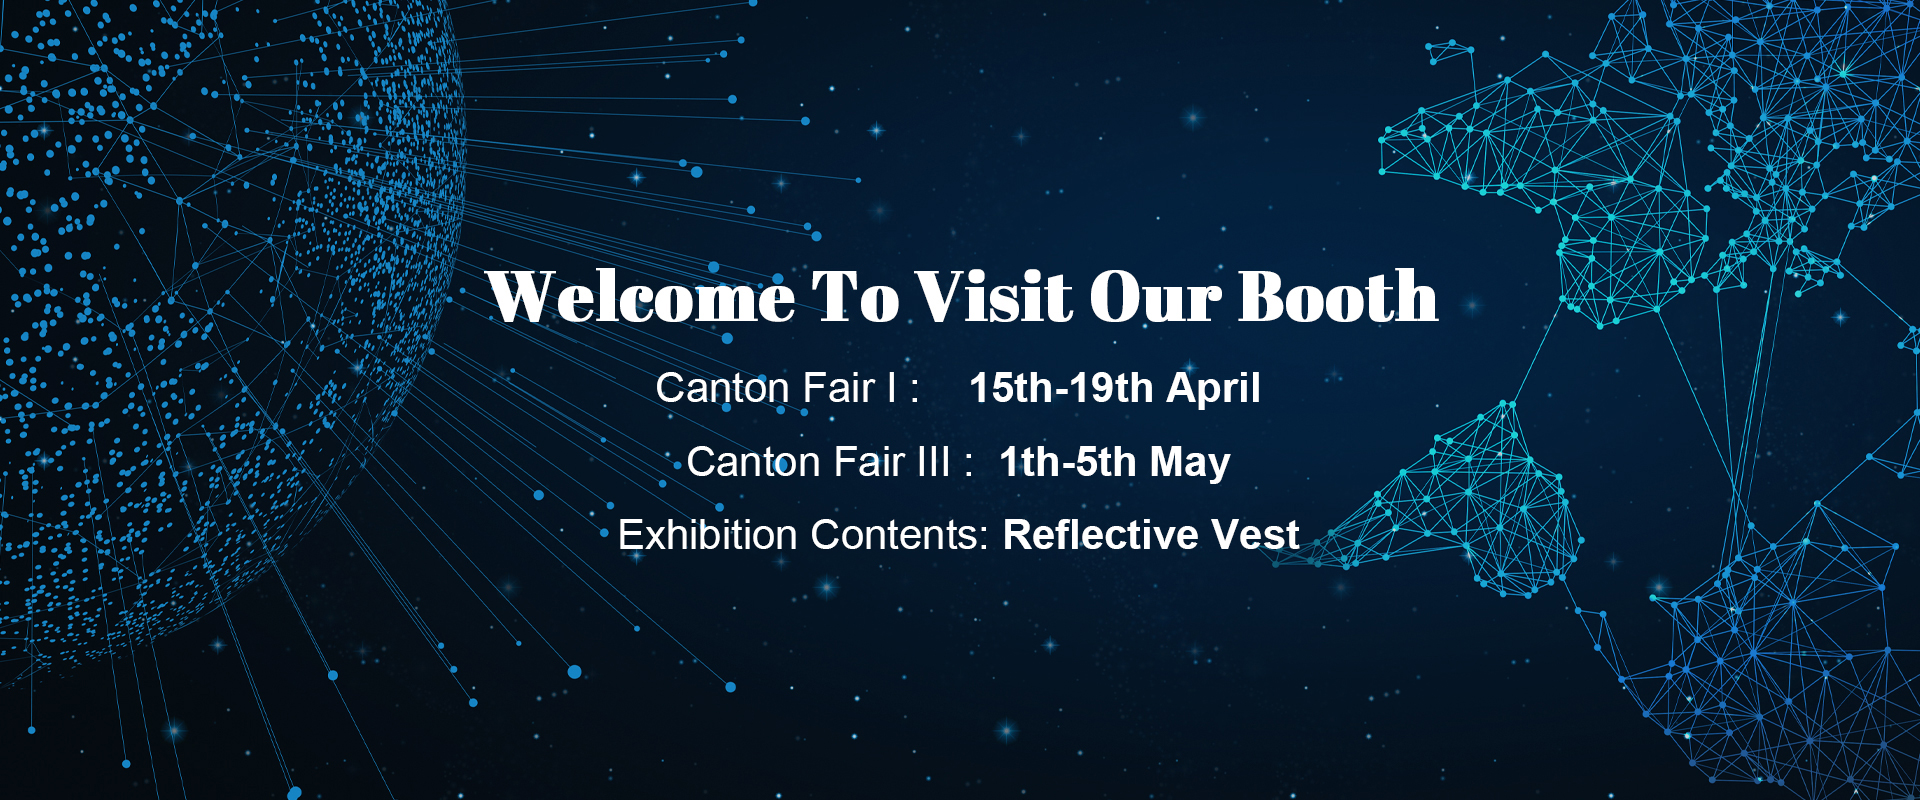 Welcome To Visit Our Booth